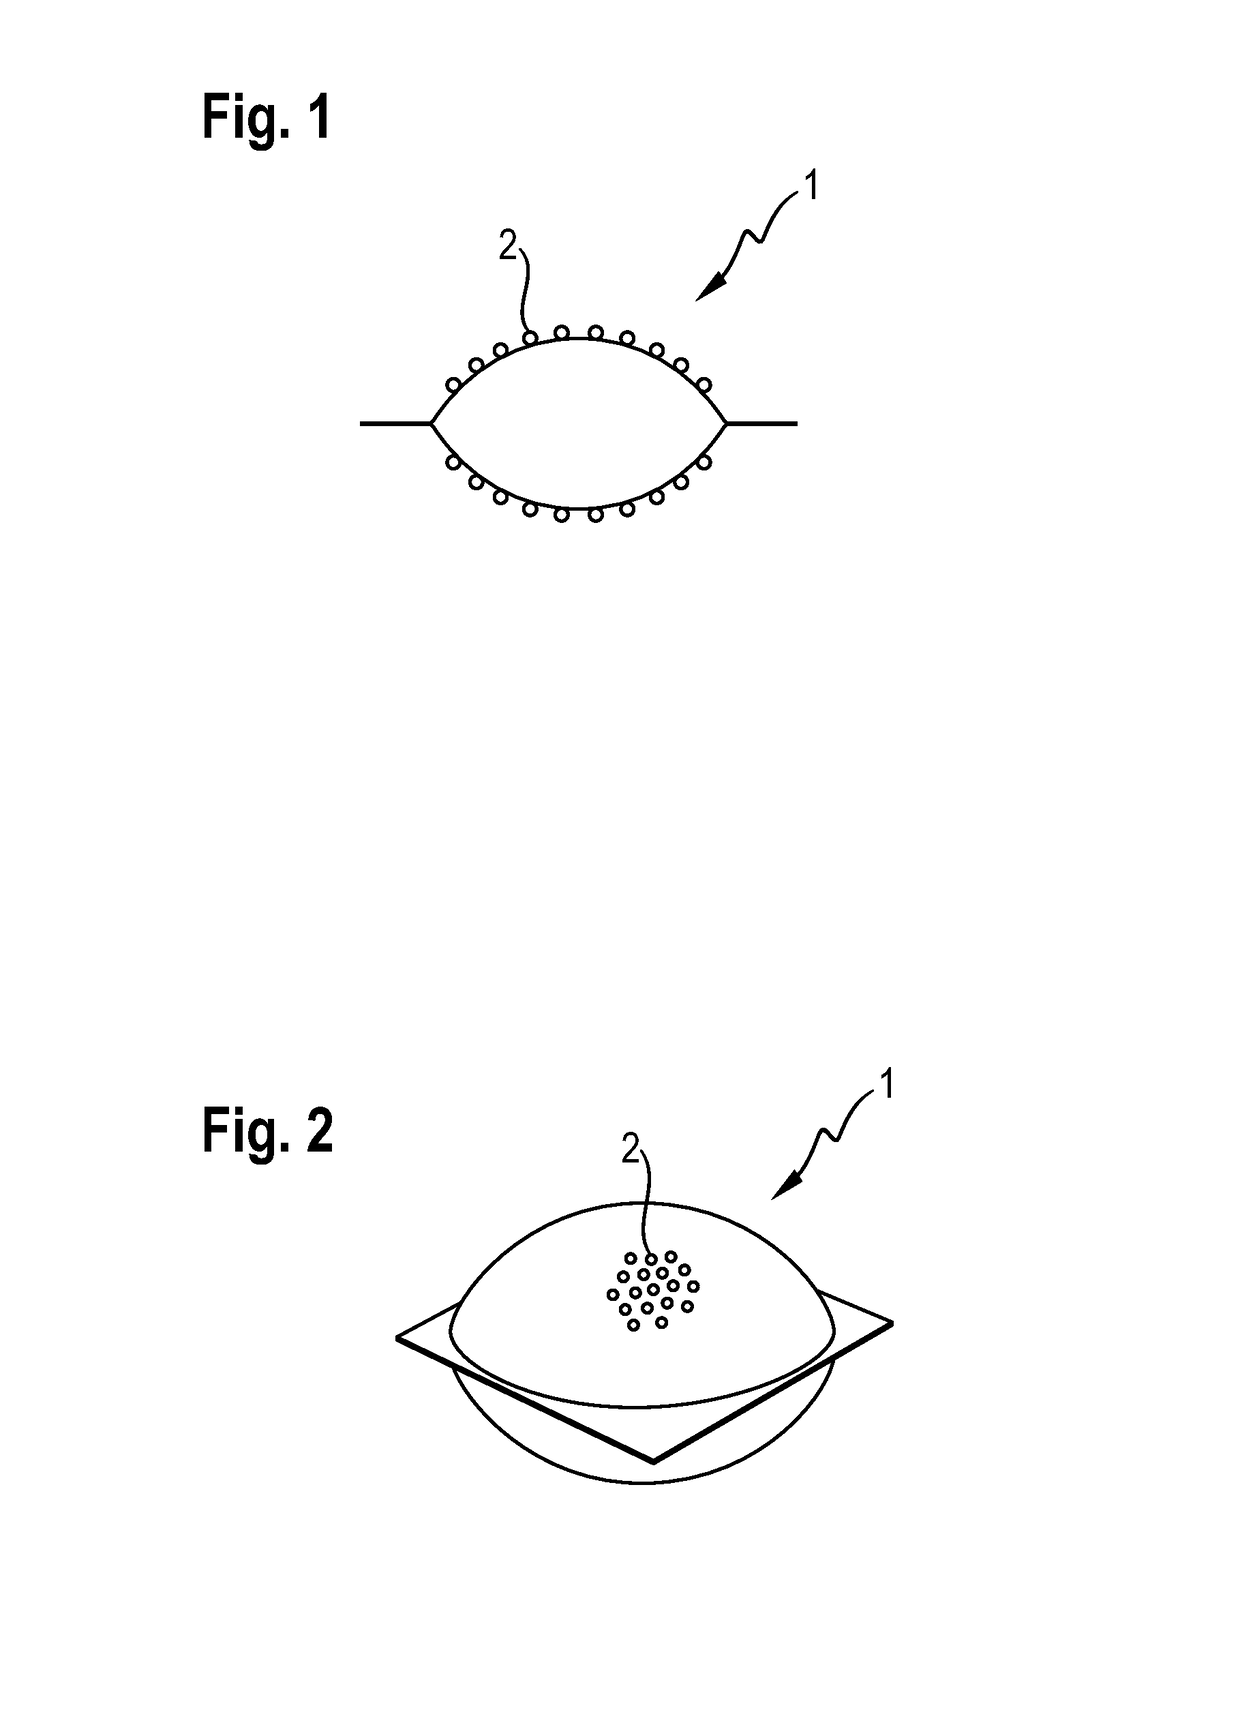 Water soluble unit dose article comprising an aversive agent